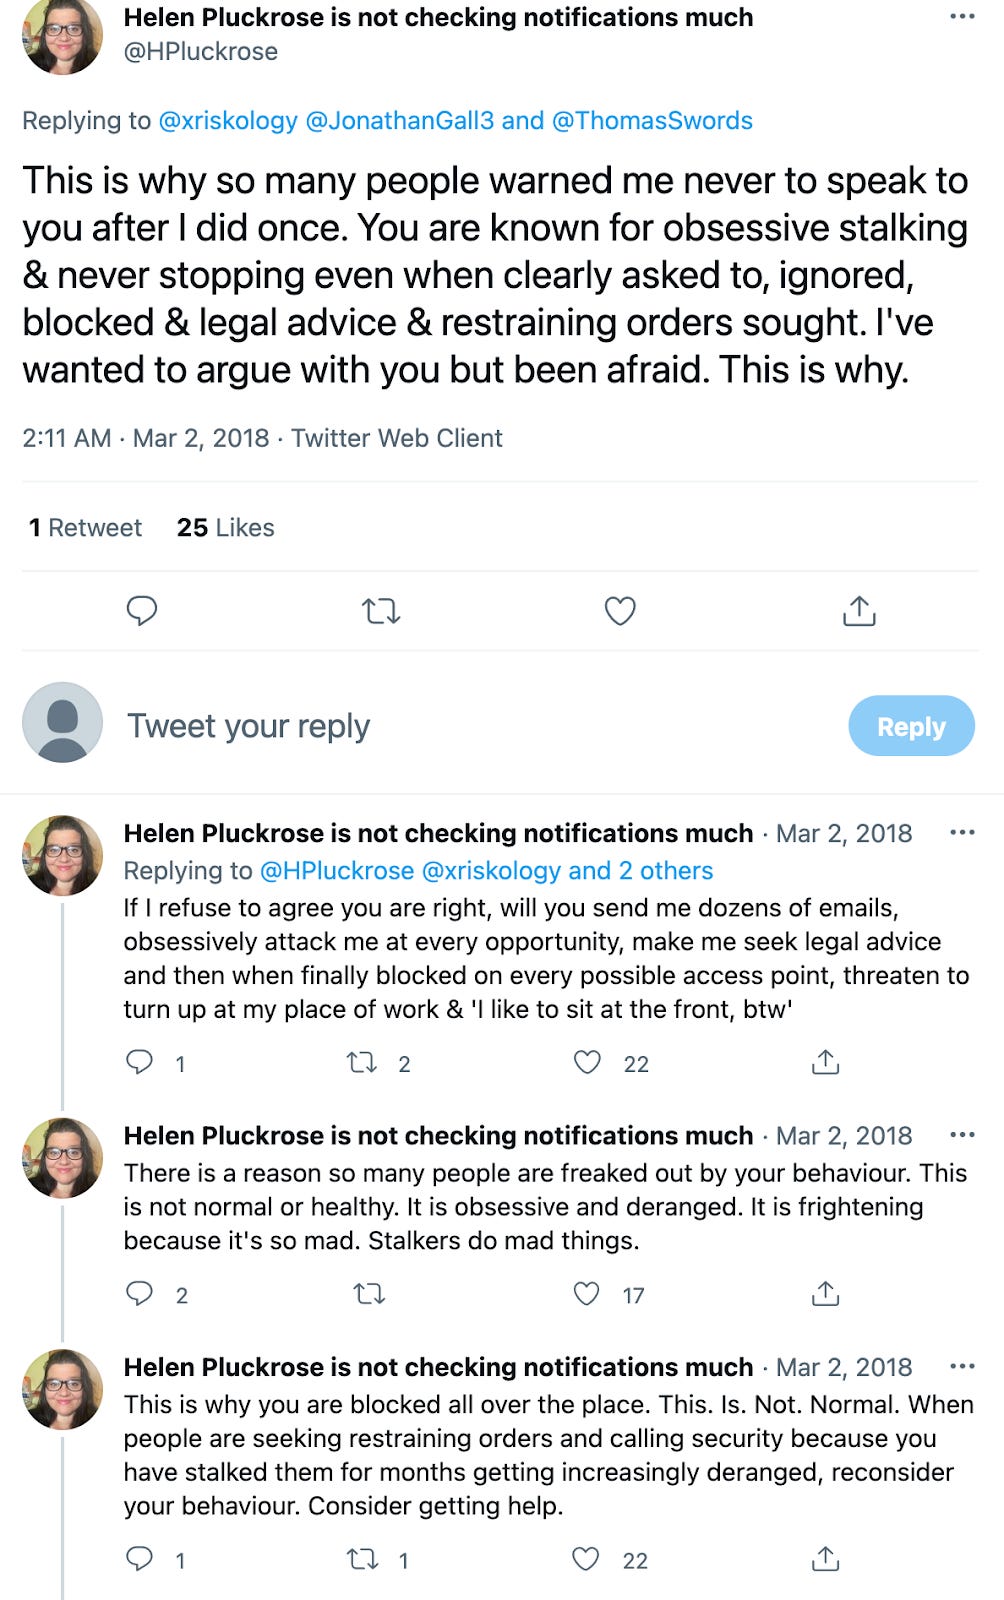 Helen Pluckrose: This is why so many people warned me never to speak to you after I did once. You are known for obsessive stalking & never stopping even when clearly asked to, ignored, blocked & legal advice & restraining orders sought. I've wanted to argue with you but been afraid. This is why. Helen Pluckrose: If I refuse to agree you are right, will you send me dozens of emails, obsessively attack me at every opportunity, make me seek legal advice and then when finally blocked on every possible access point, threaten to turn up at my place of work & 'I like to sit at the front, by the way' Helen Pluckrose: There is a reason so many people are freaked out by your behaviour. This is not normal or healthy. It is obsessive and deranged. It is frightening because it's so mad. Stalkers do mad things. Helen Pluckrose: This is why you are blocked all over the place. This. Is. Not. Normal. When people are seeking restraining orders and calling security because you have stalked them for months getting increasingly deranged, reconsider your avic Consider getting help. 